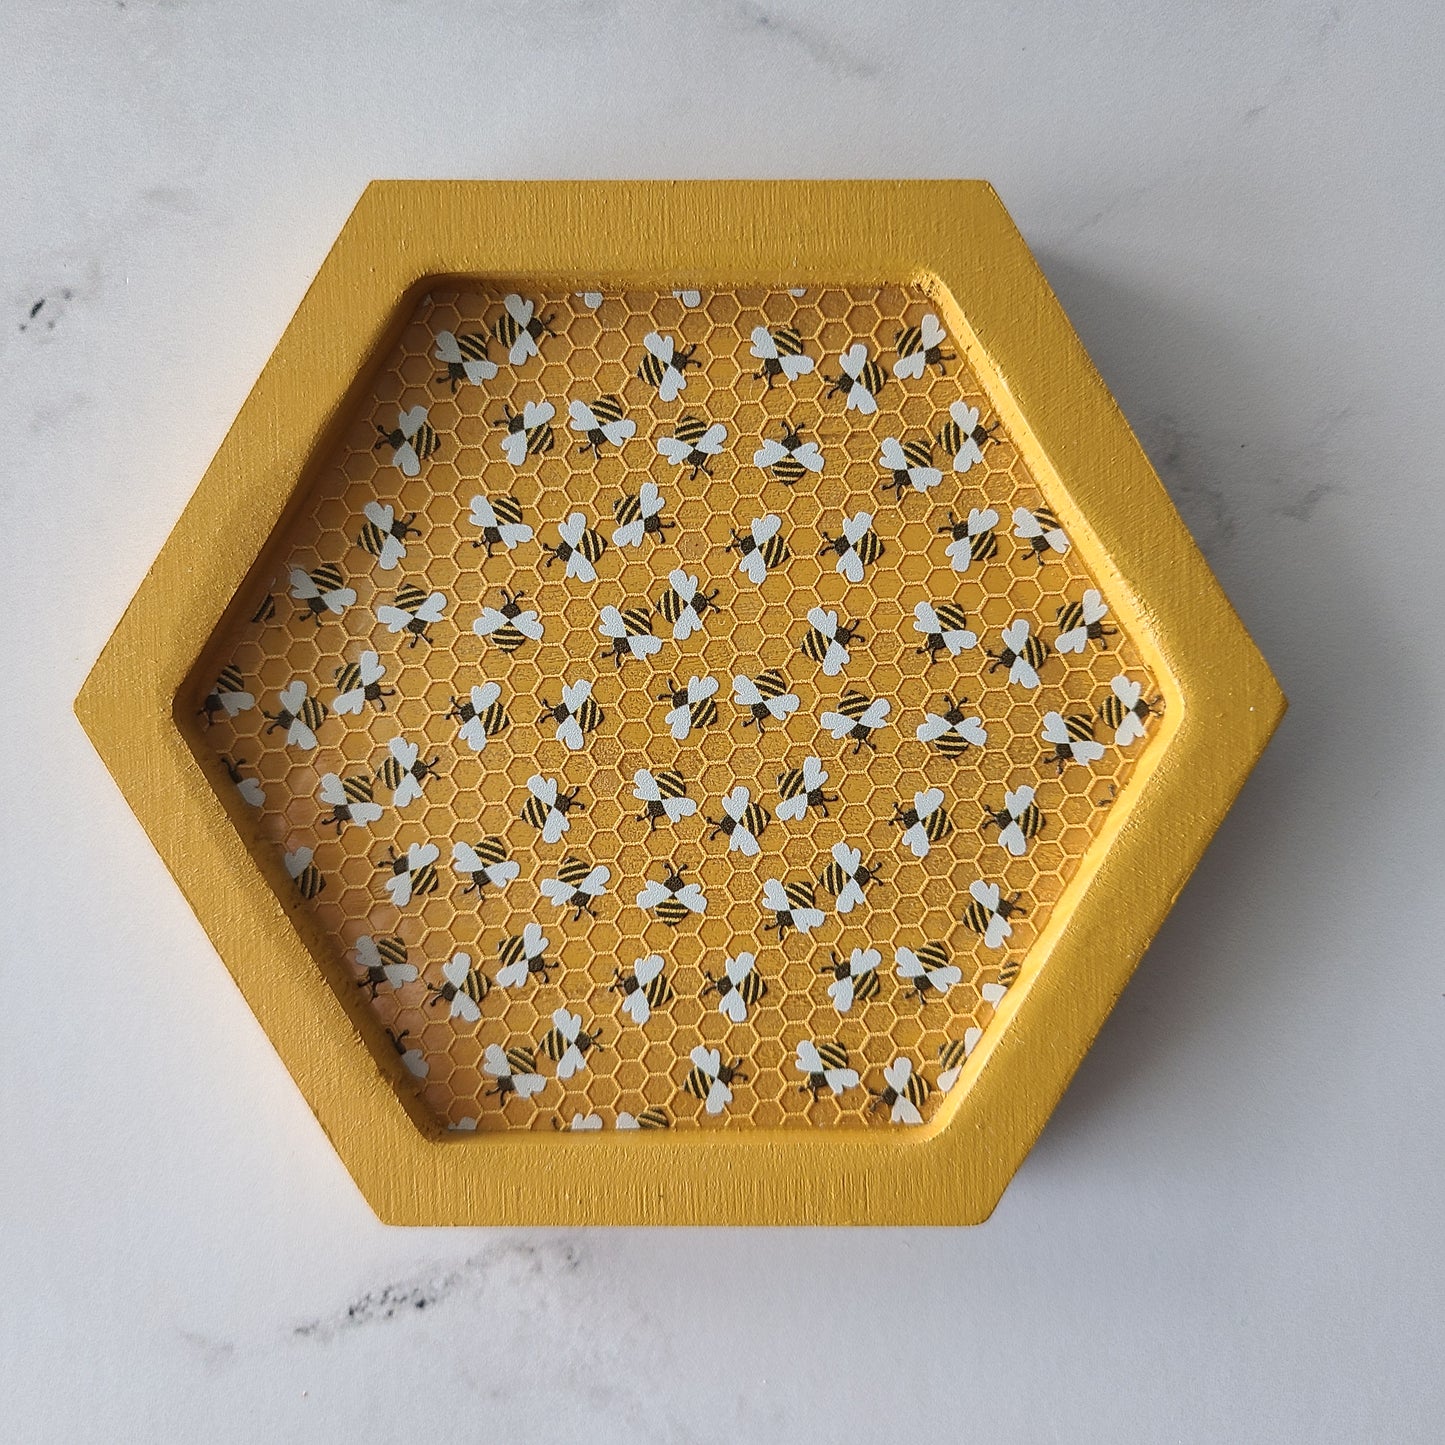 "Bees in a Honeycomb" Coaster